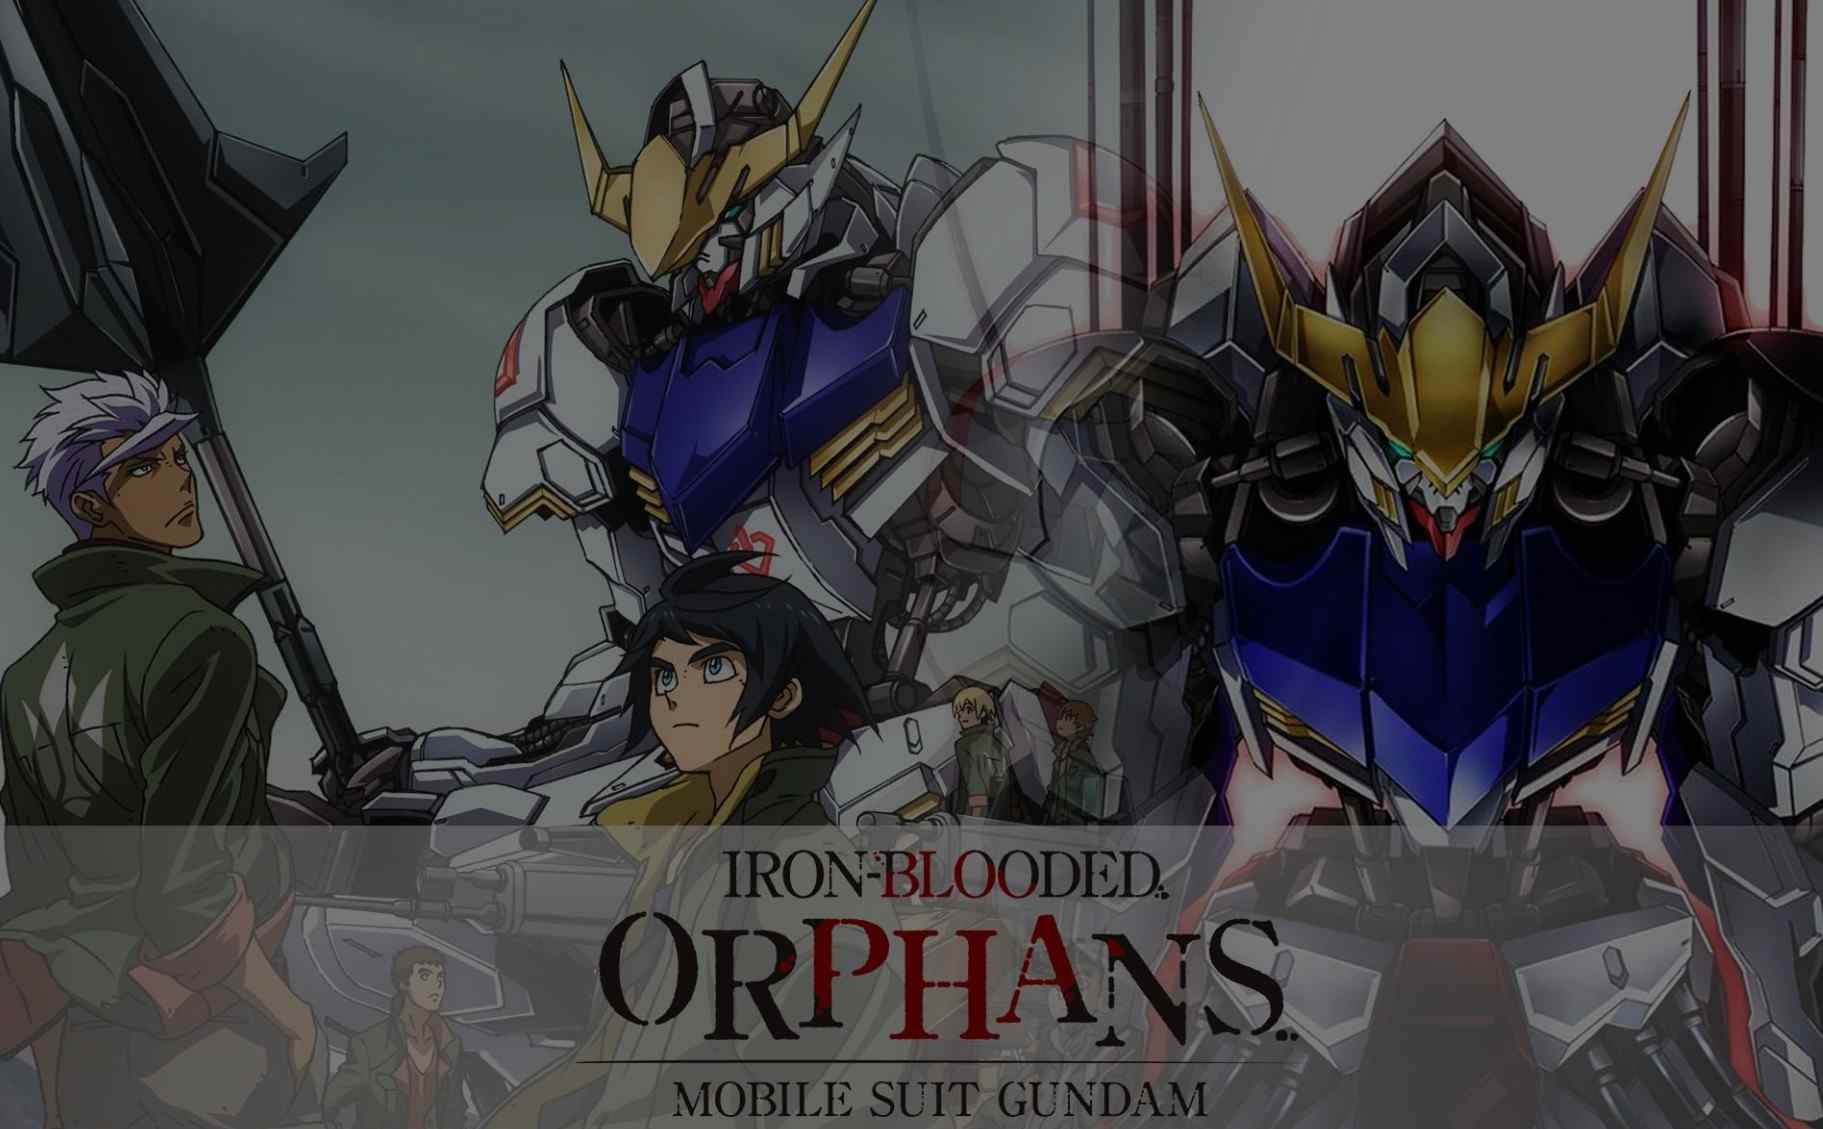 Mobile Suit Gundam- Iron-Blooded Orphans